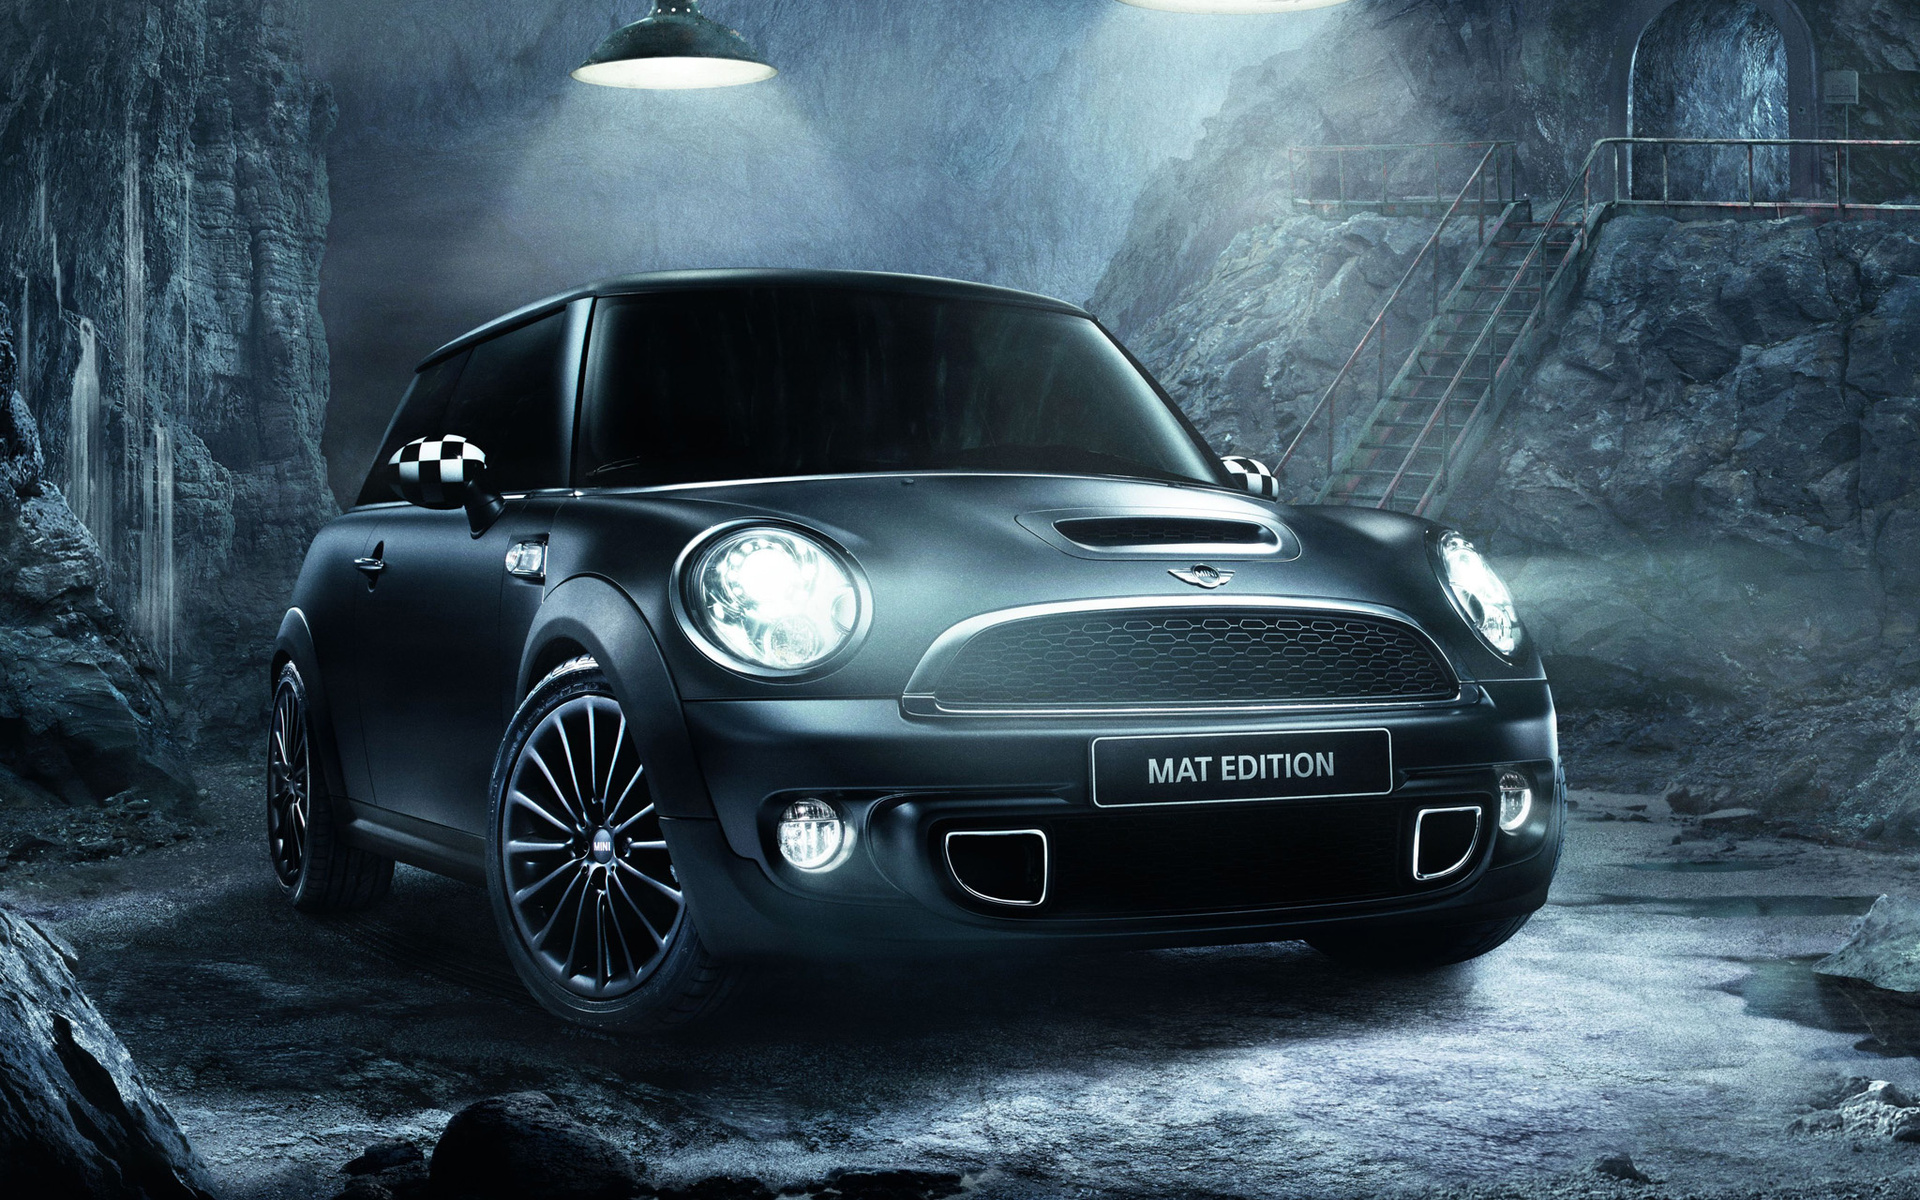 160+ Mini Cooper HD Wallpapers and Backgrounds